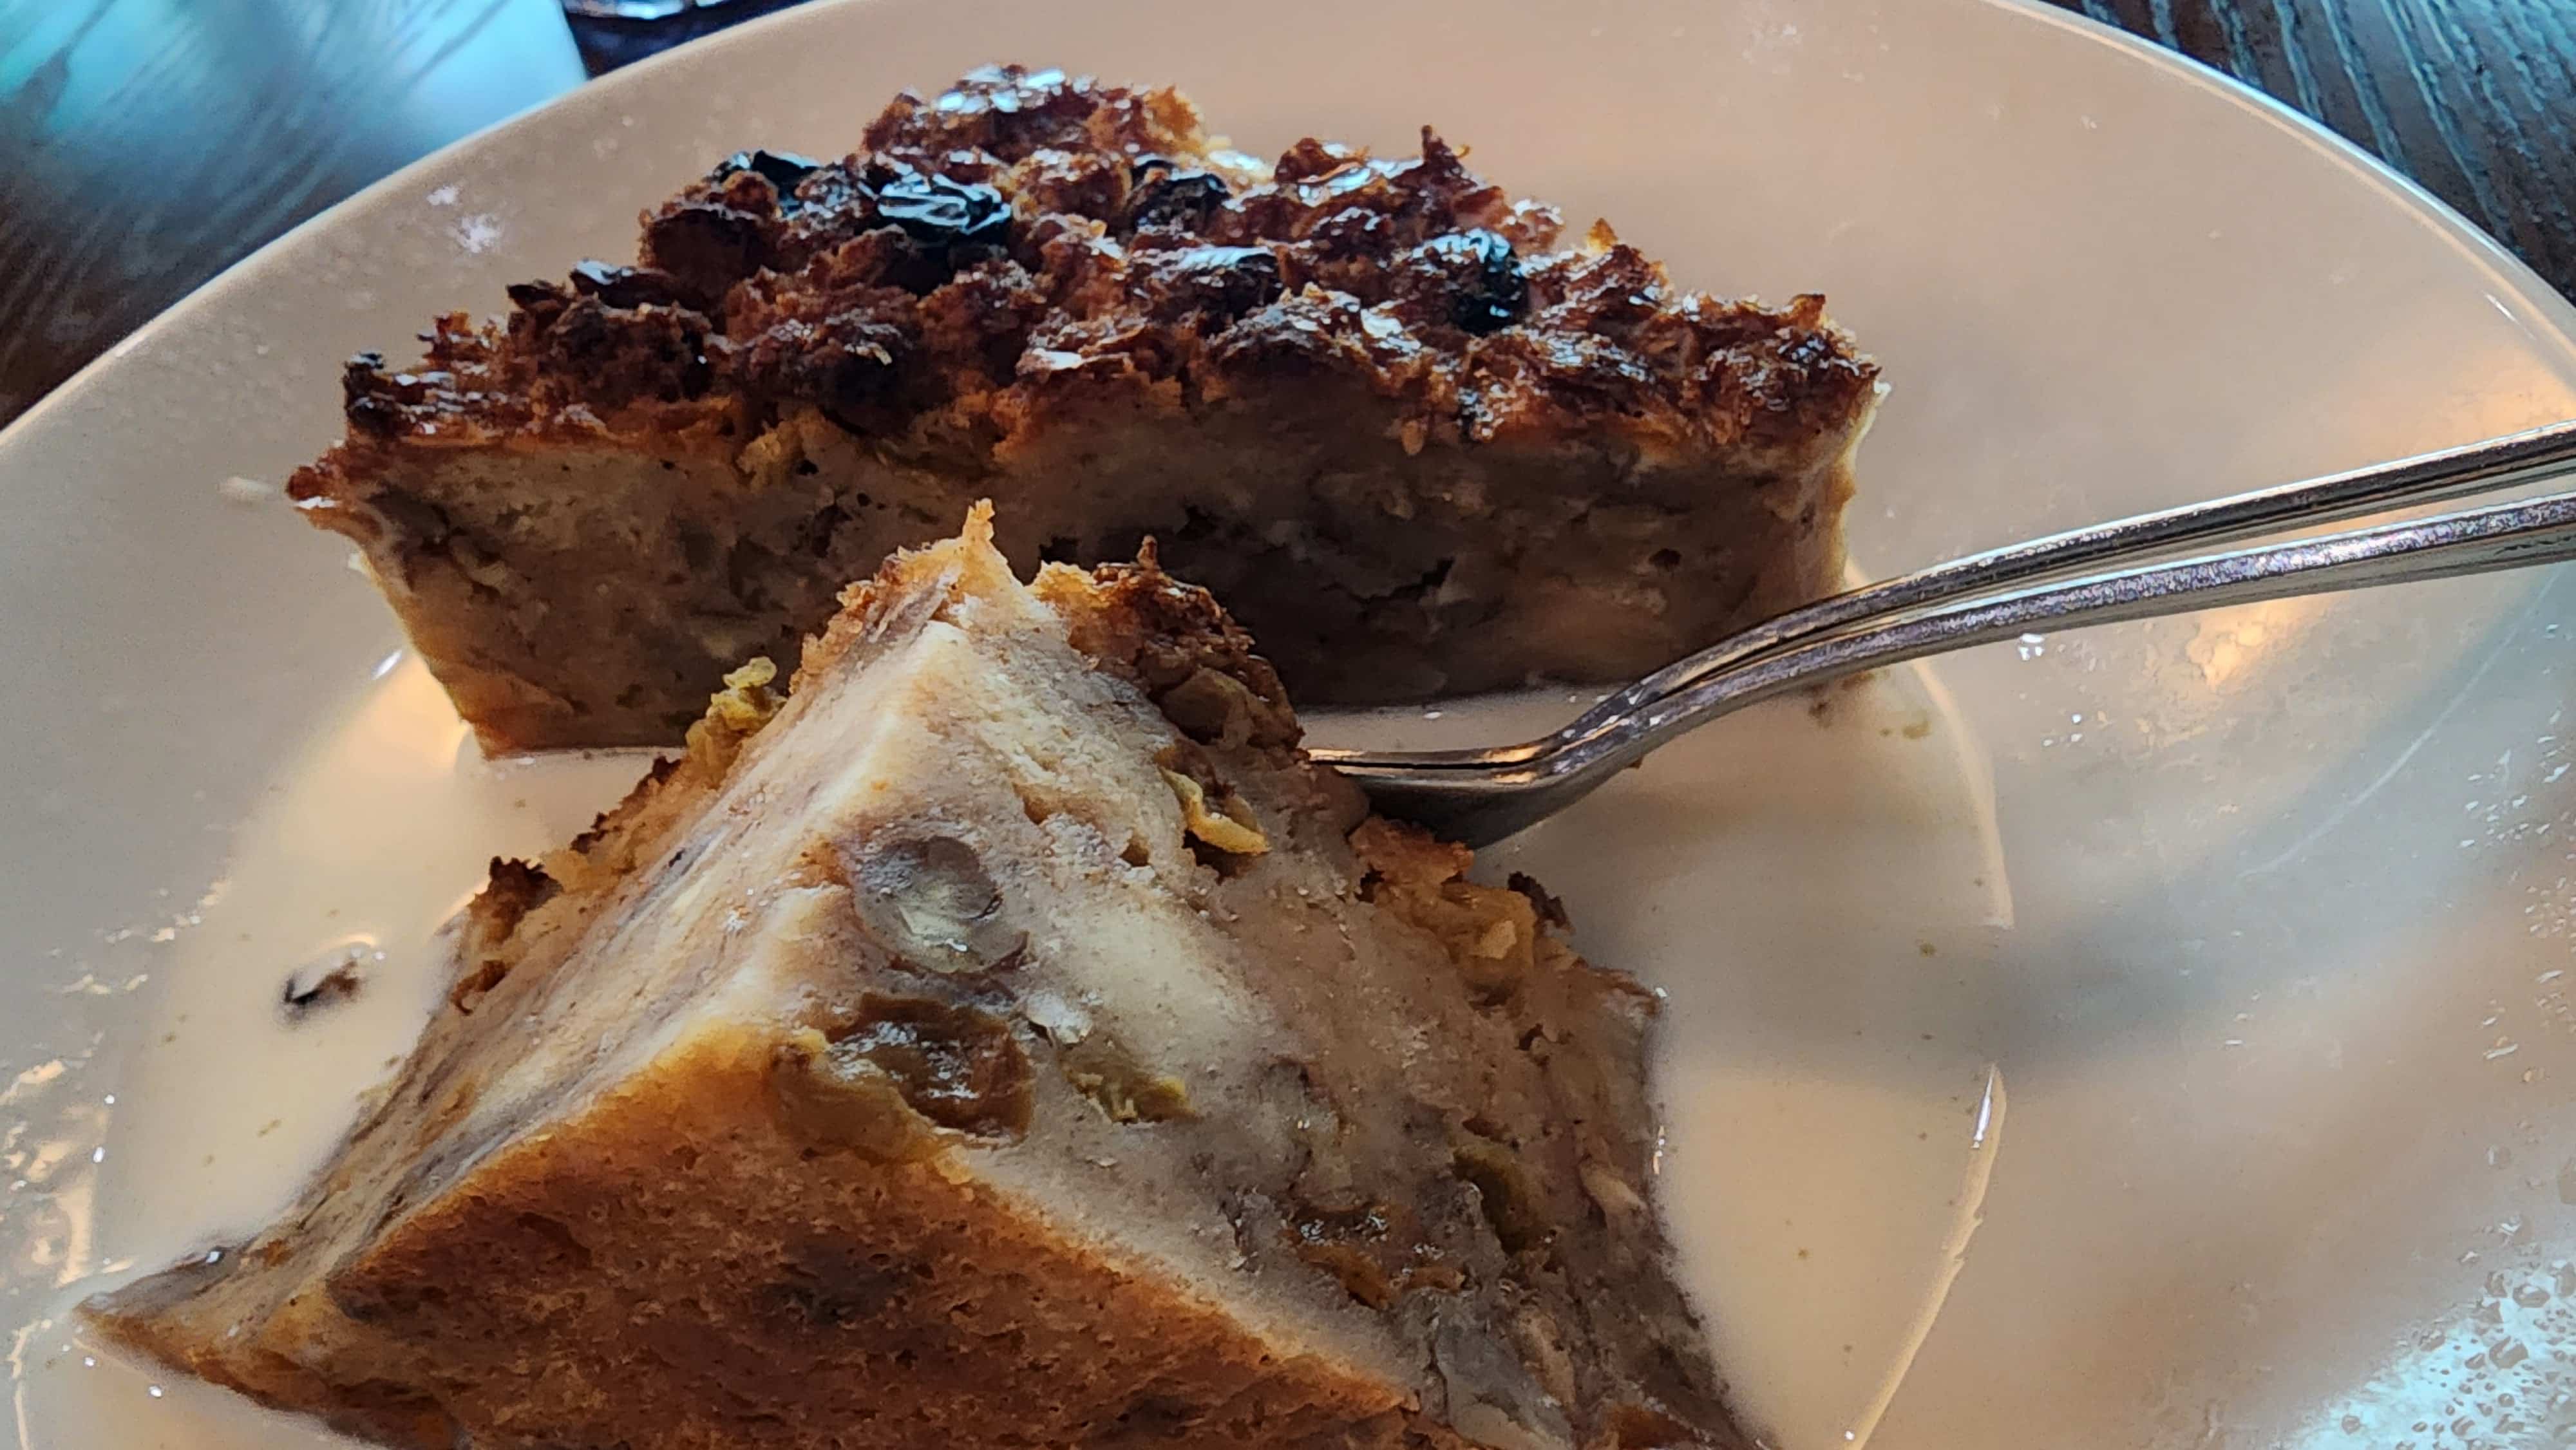 New Orleans style bread pudding